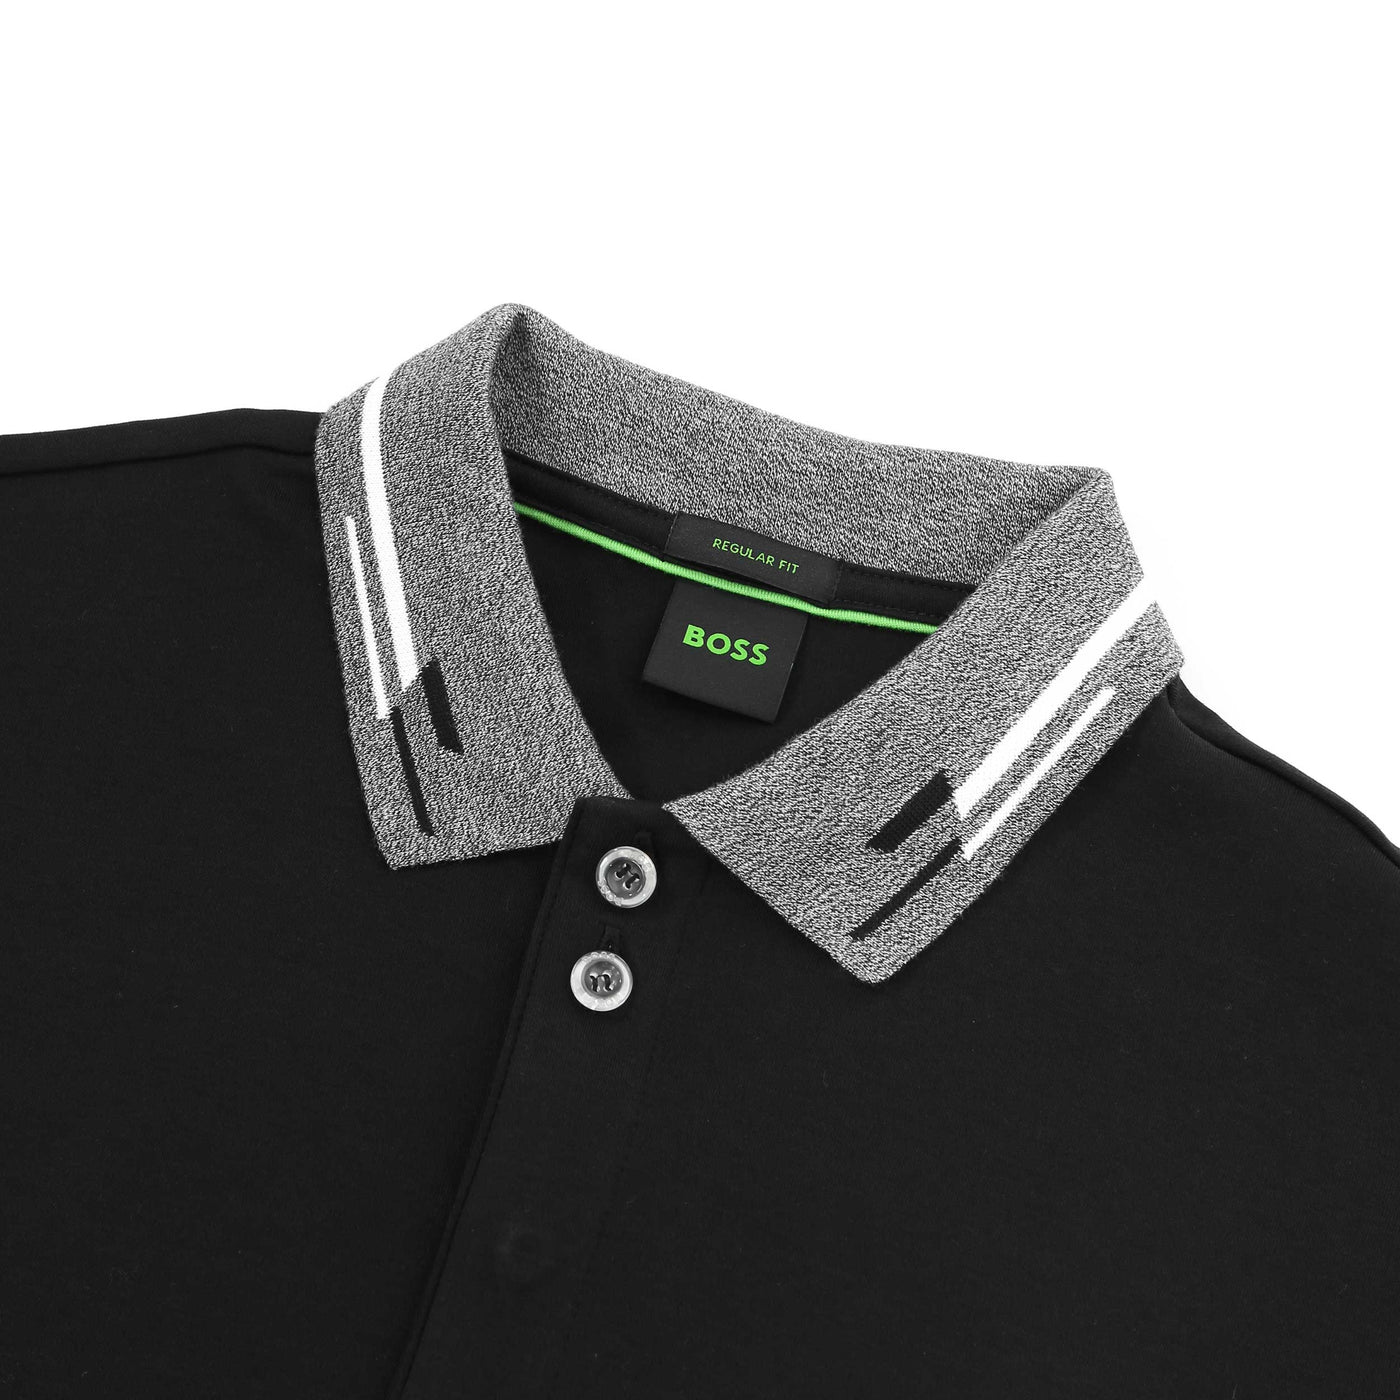 Boss Paddy 1 Polo Shirt in Black Neck